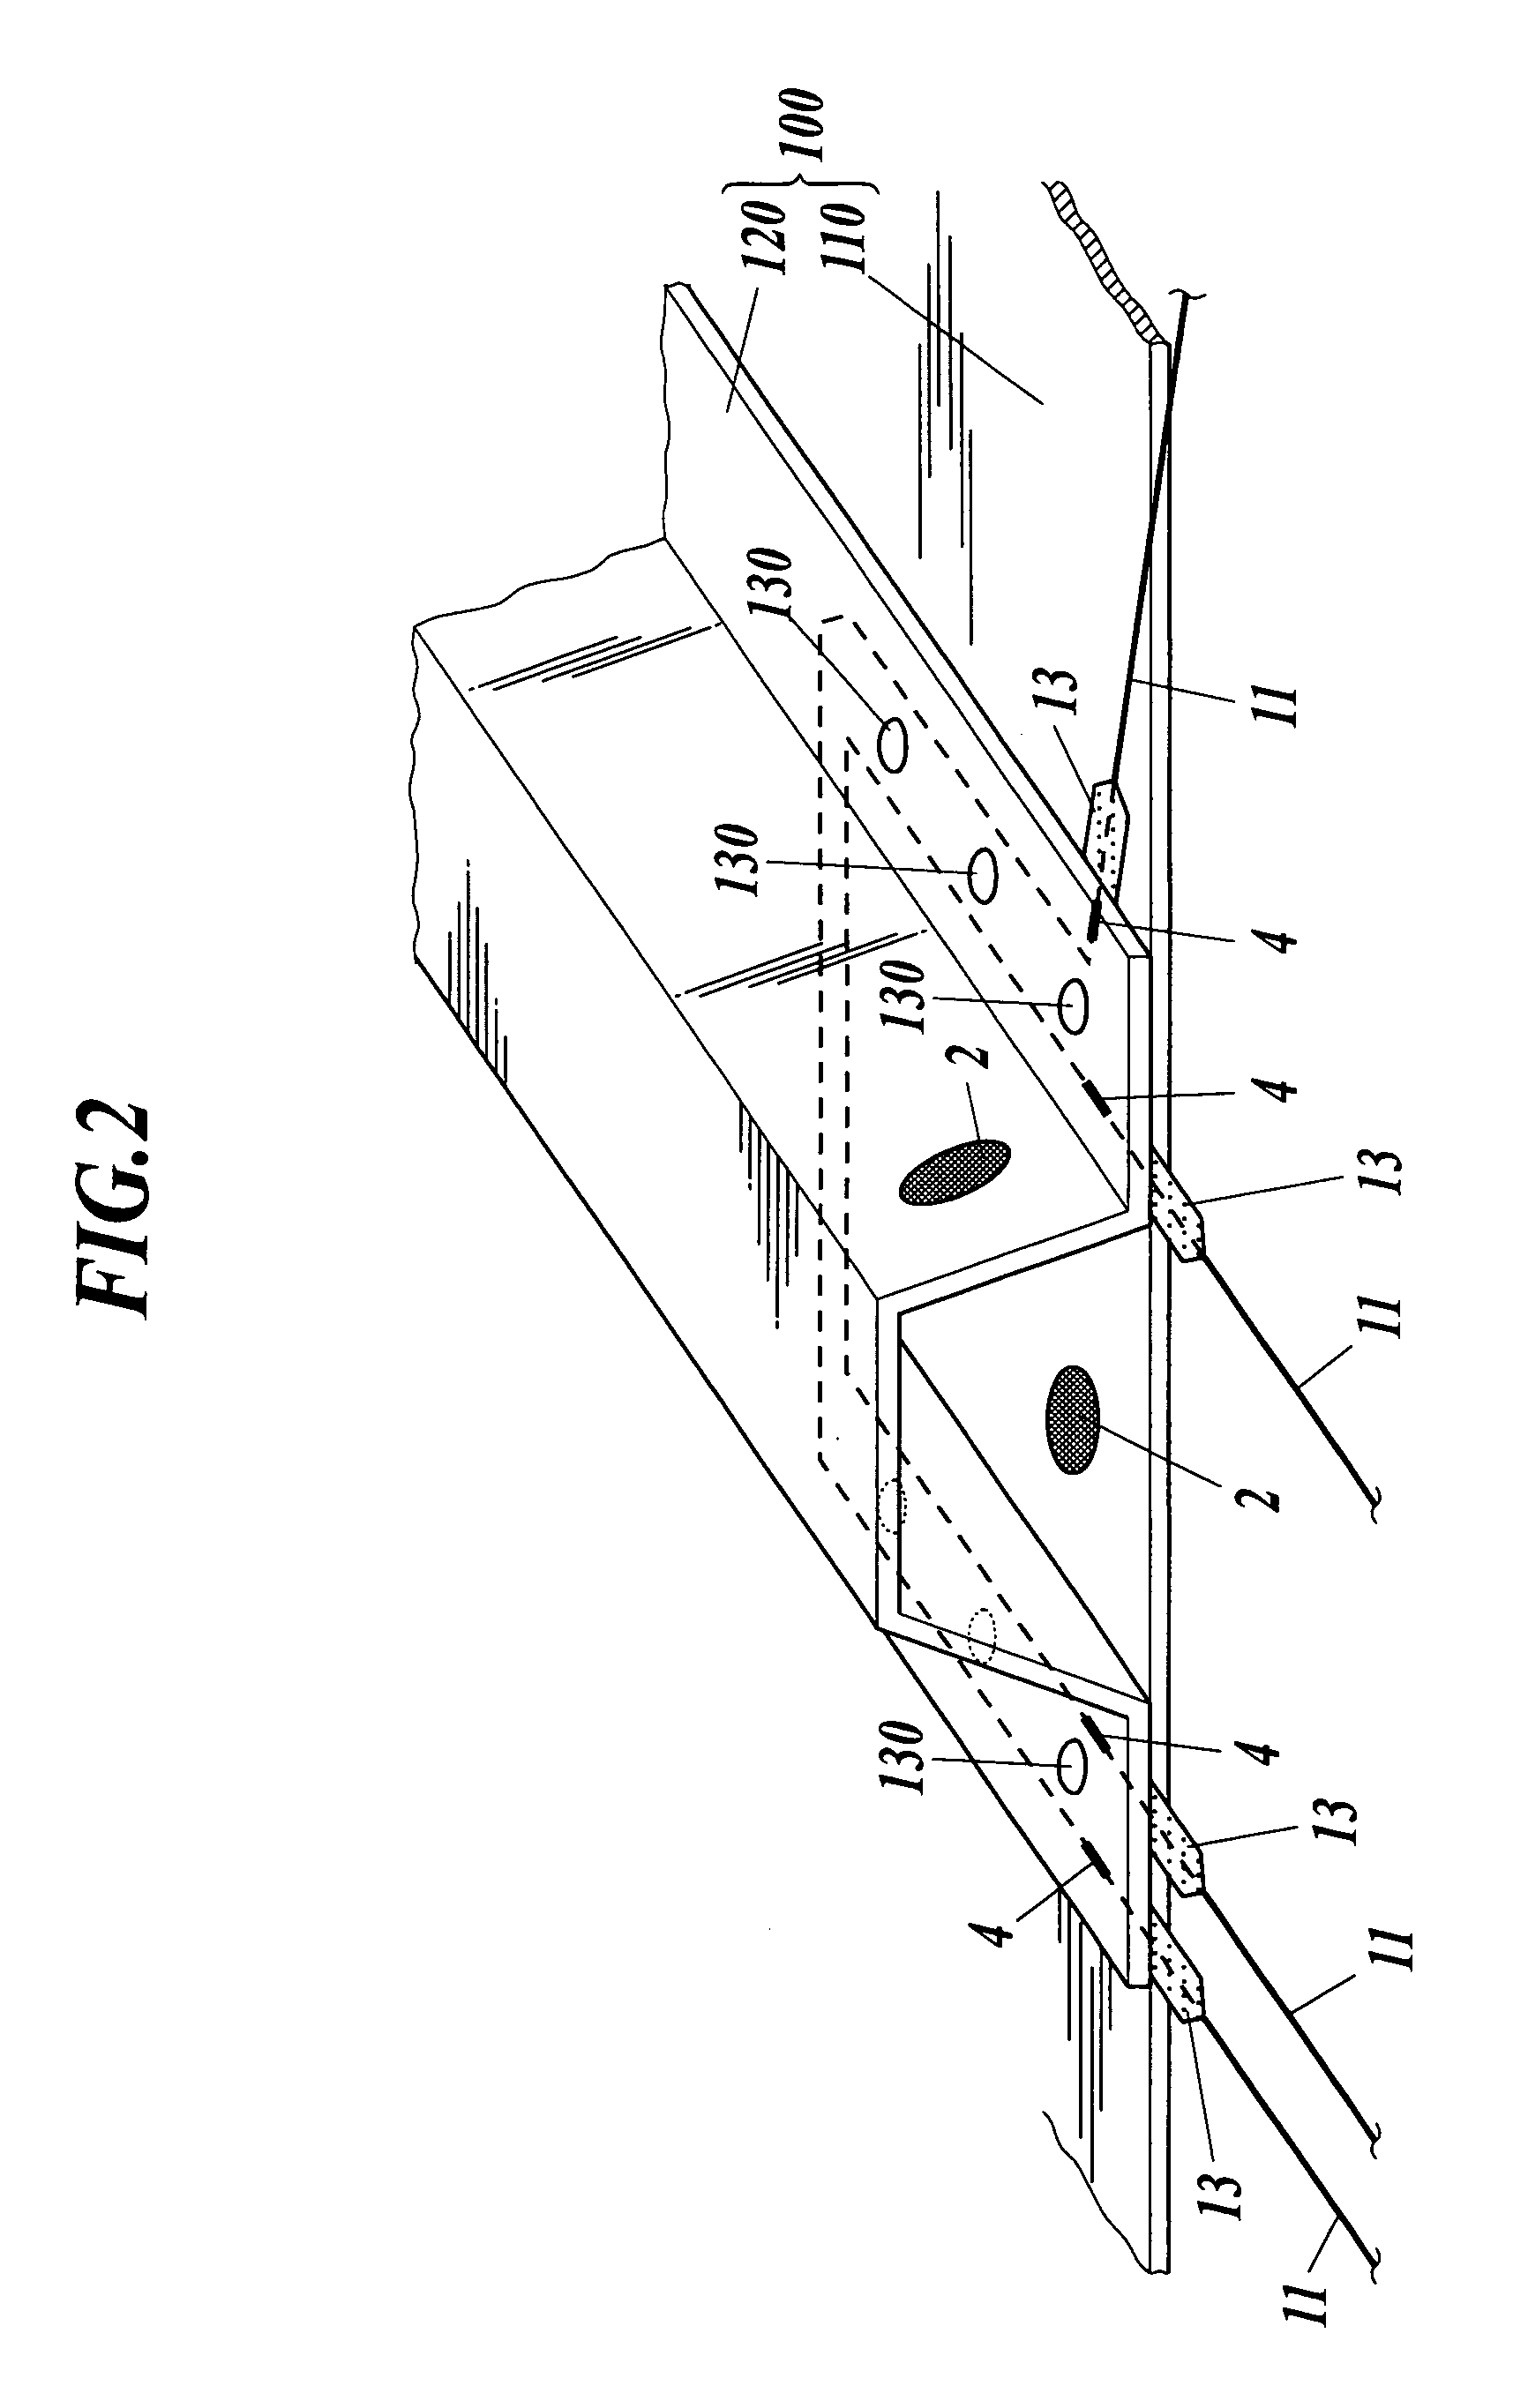 Modular sensor for damage detection, manufacturing method, and structural composite material